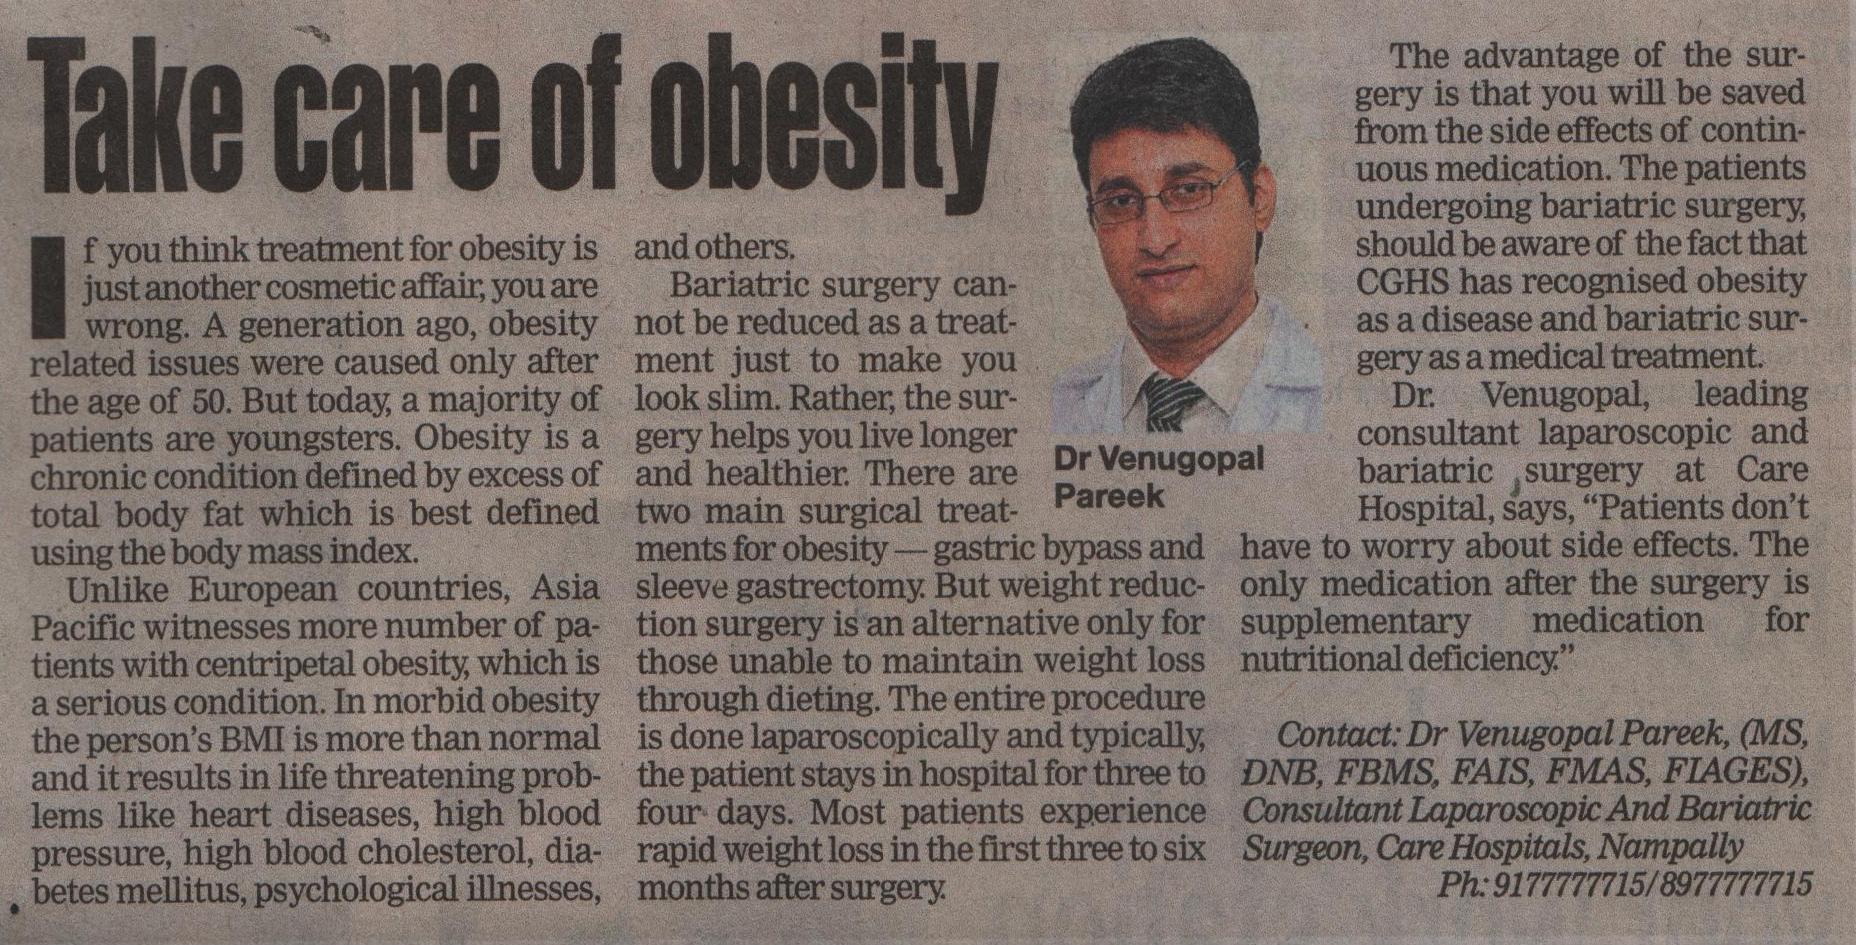 Bariatric surgery help you to treat the obesity problem and to live longer and healthier with weight loss - Dr V Pareek, Bariatric surgeon in Hyderabad